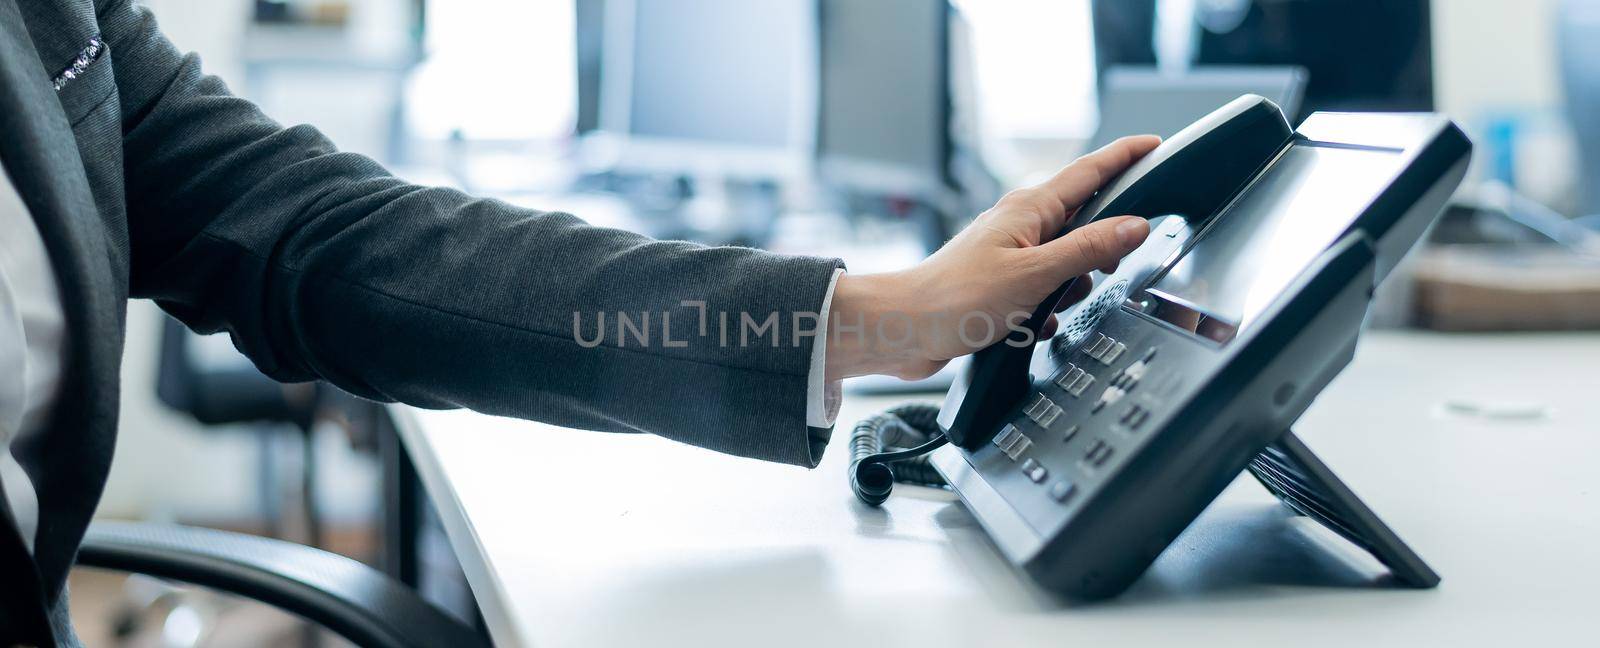 Close-up of a female employee's hand on a landline phone. Woman picks up a push-button telephone at the workplace in the office.